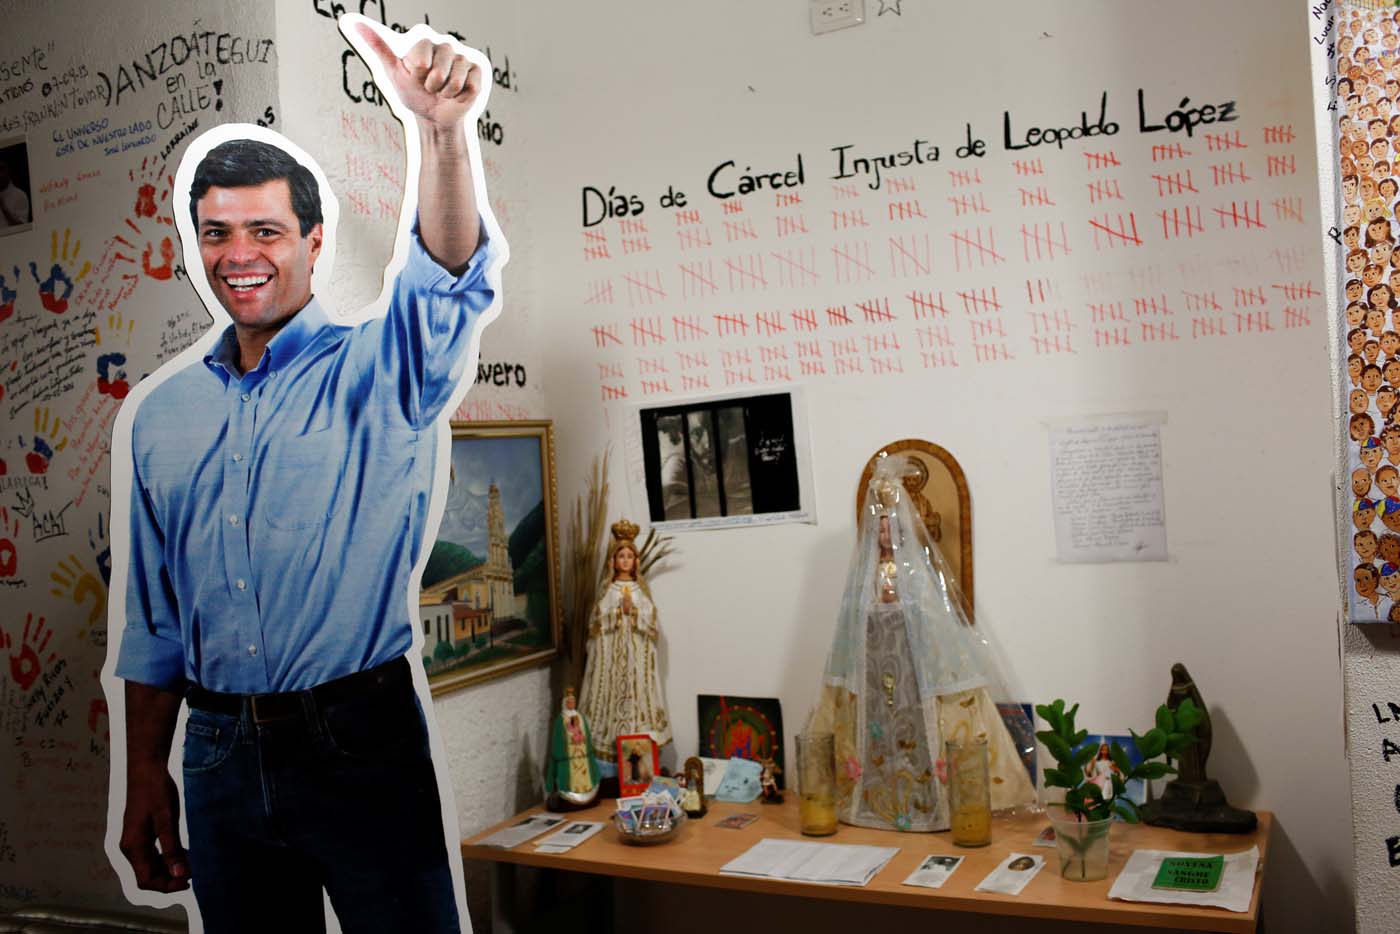 A cardboard cut-out of the jailed opposition leader Leopoldo Lopez is seen next to a religious altar, at the office of the party Popular Will (Voluntad Popular) in Caracas, Venezuela January 18, 2017. Picture taken January 18, 2017. REUTERS/Carlos Garcia Rawlins